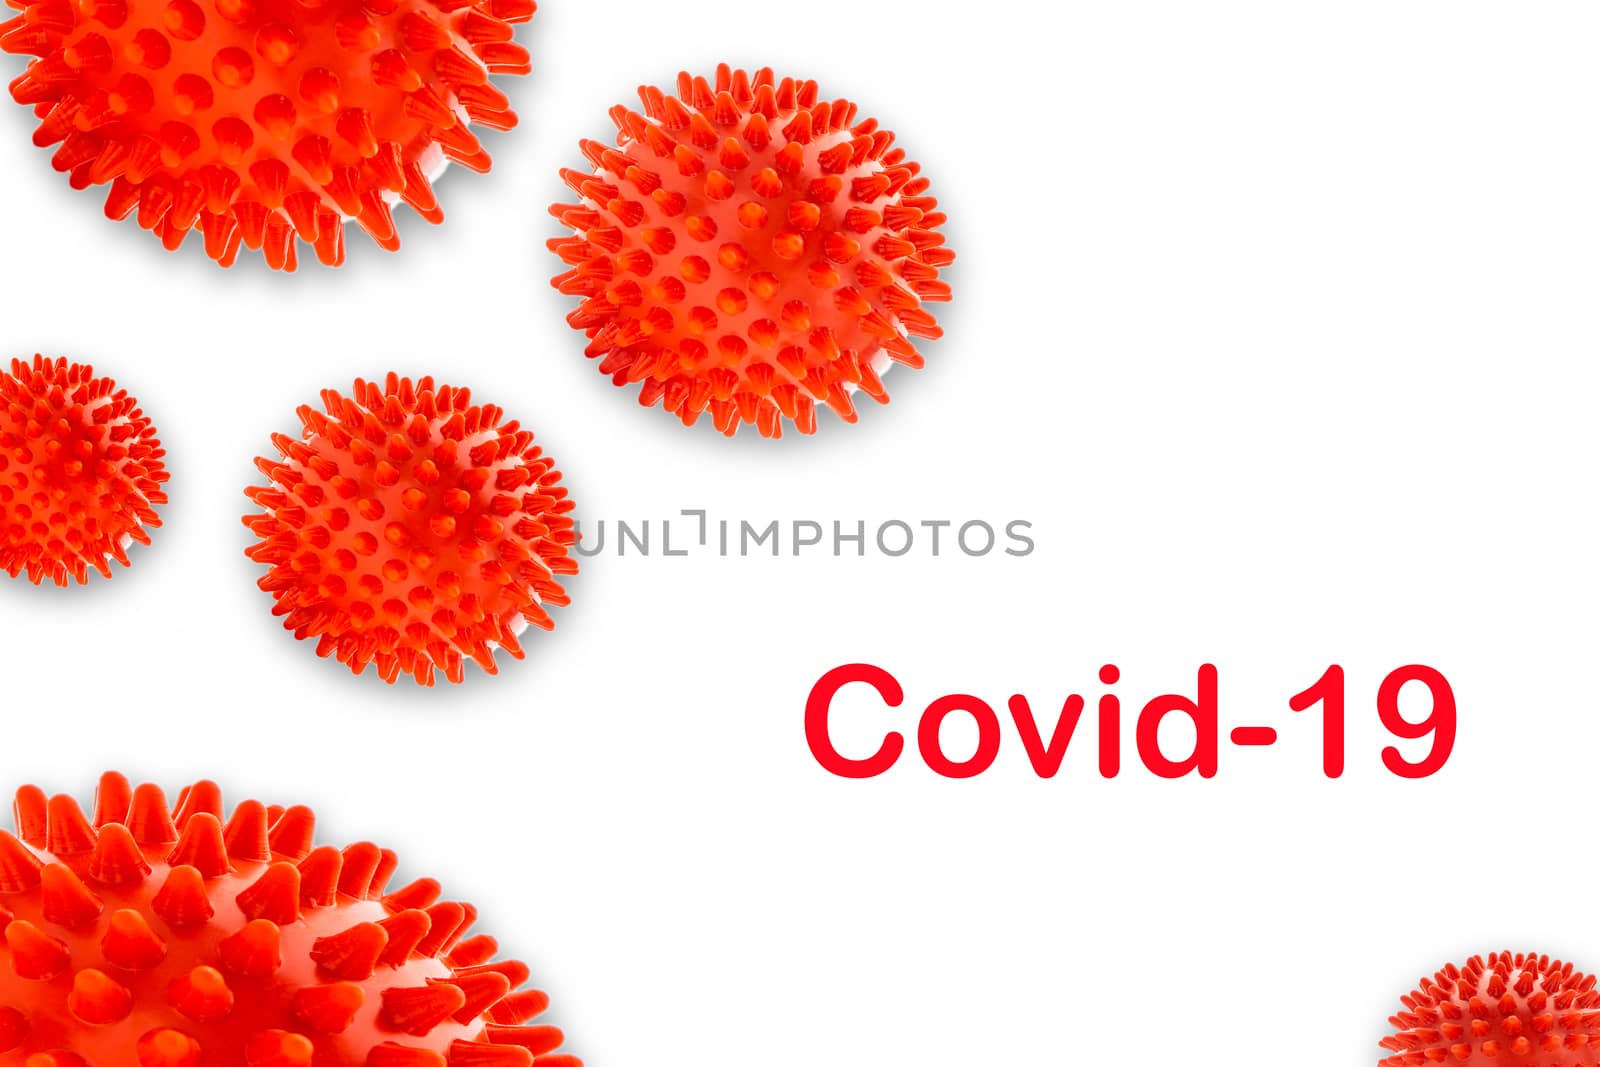 COVID-19 text on white background. Covid-19 or Coronavirus concept by silverwings